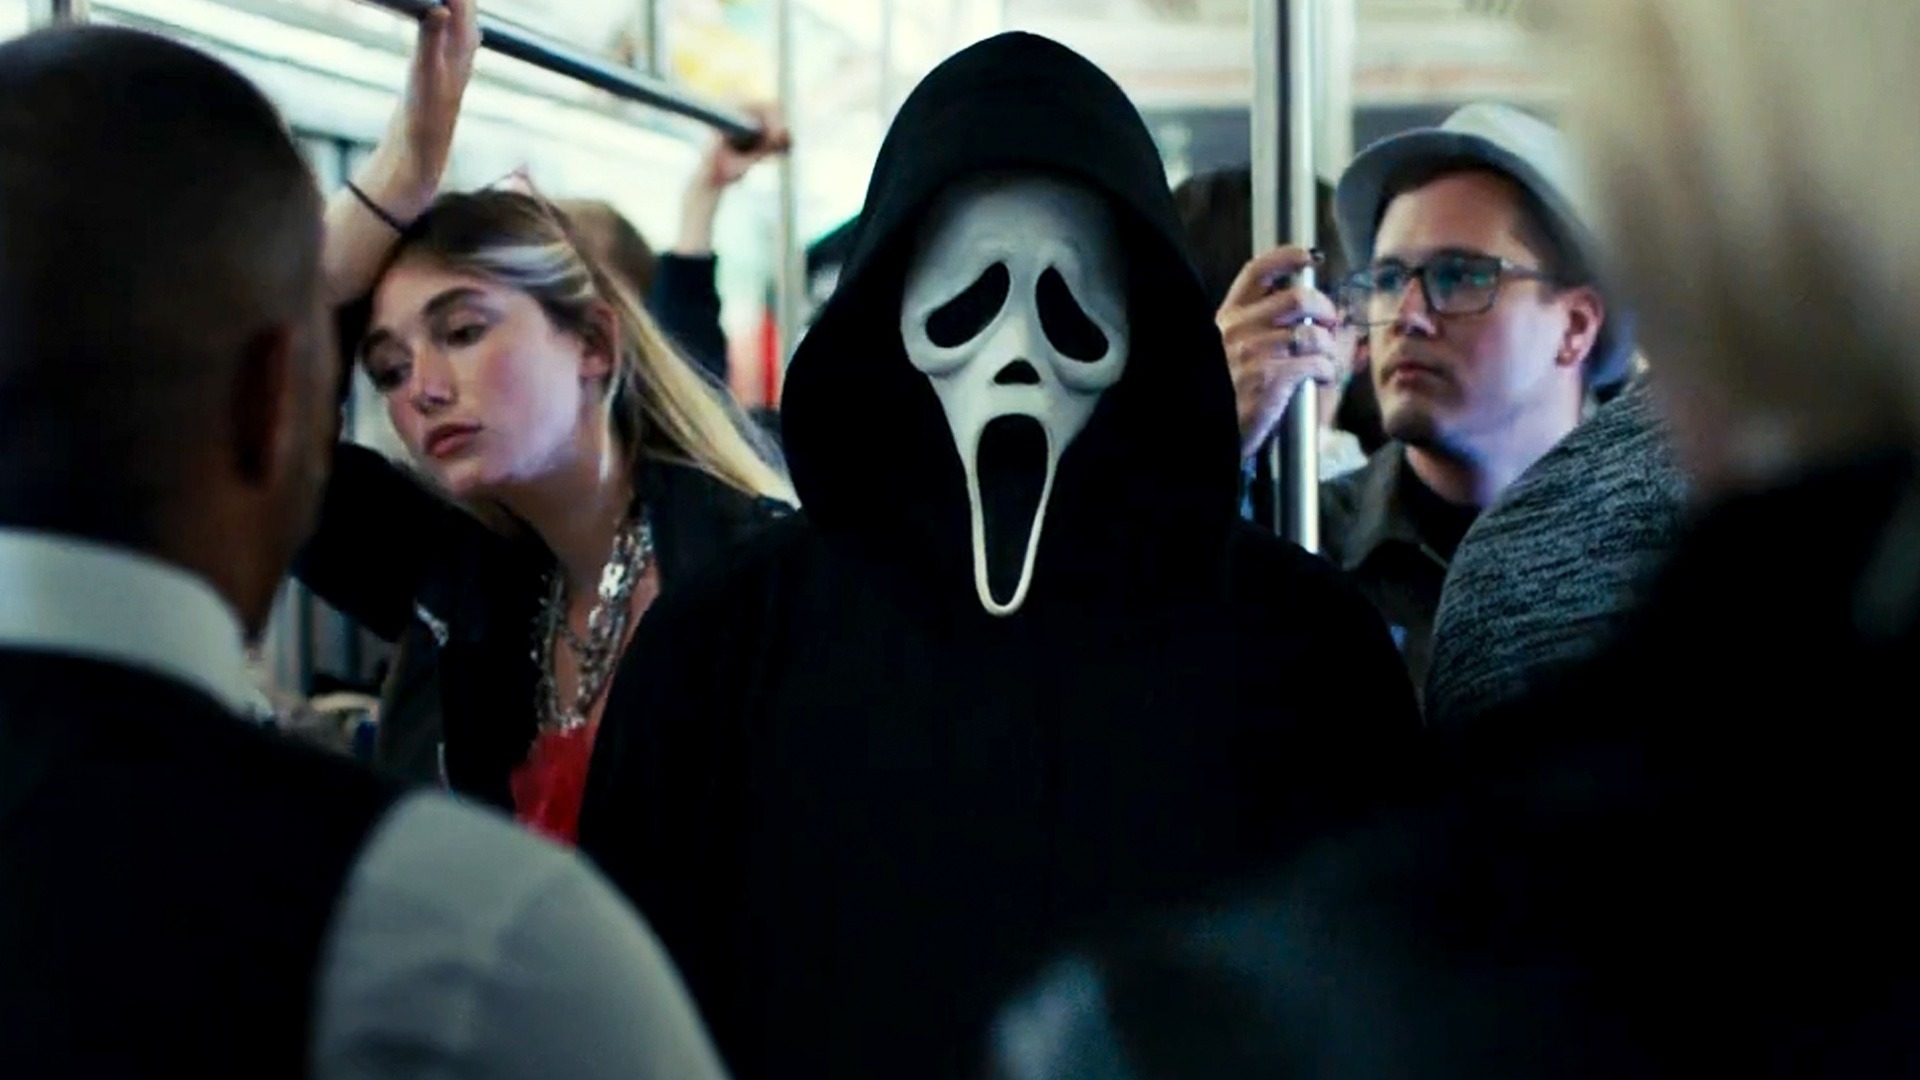 Scream VI: Official Clip - Sam Becomes Ghostface - Trailers & Videos -  Rotten Tomatoes